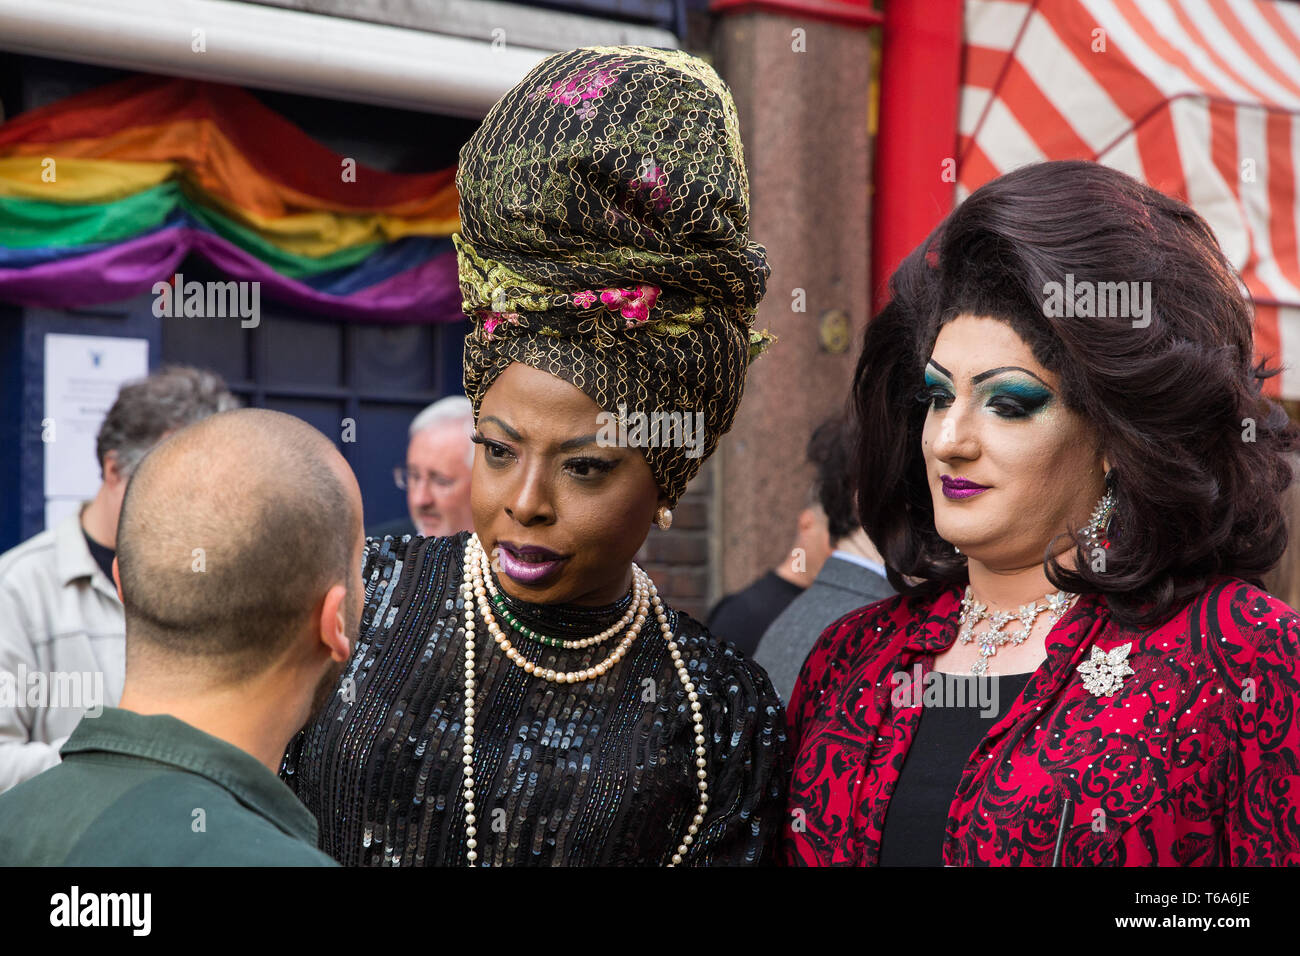 London, UK. 30th April 2019. Members of the LGBTQ community join survivors of the Admiral Duncan bombing and families and friends of the victims outside the Admiral Duncan pub in Old Compton Street, Soho, to mark 20 years since the attack. Three people were killed and 79 injured when a bomb packed with up to 1,500 four-inch nails was detonated by a neo-Nazi at the Admiral Duncan on 30th April 1999. Credit: Mark Kerrison/Alamy Live News Stock Photo